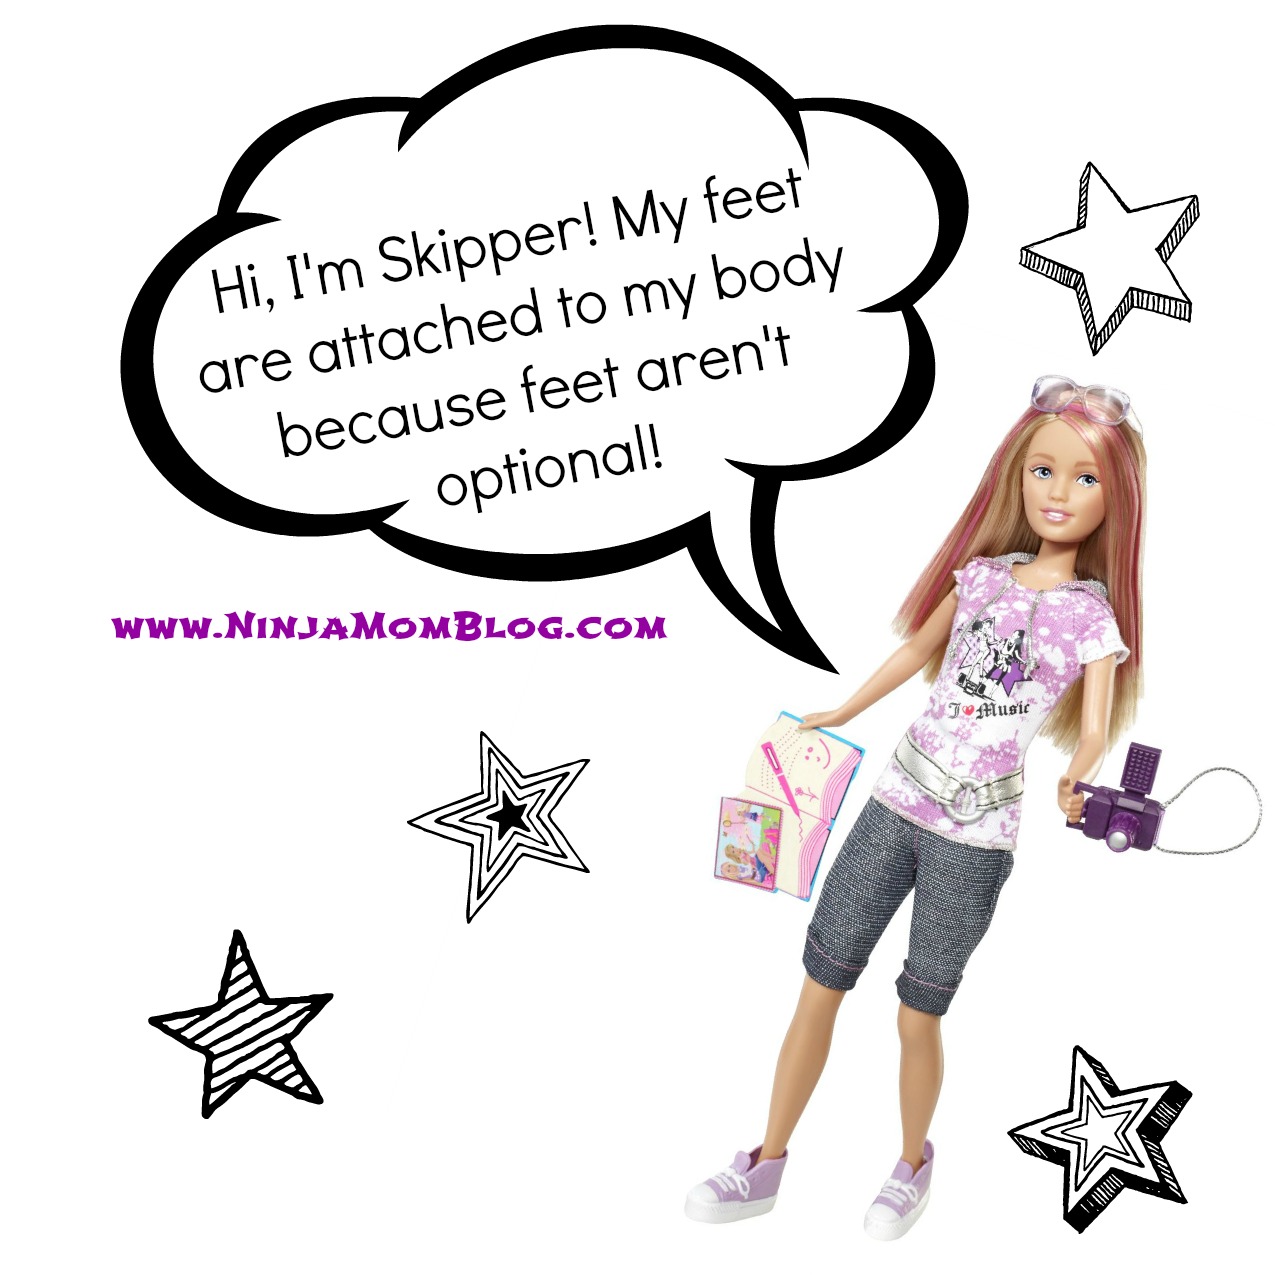 Are you there, Mattel? It’s me, Skipper by Ninja Mom Blog